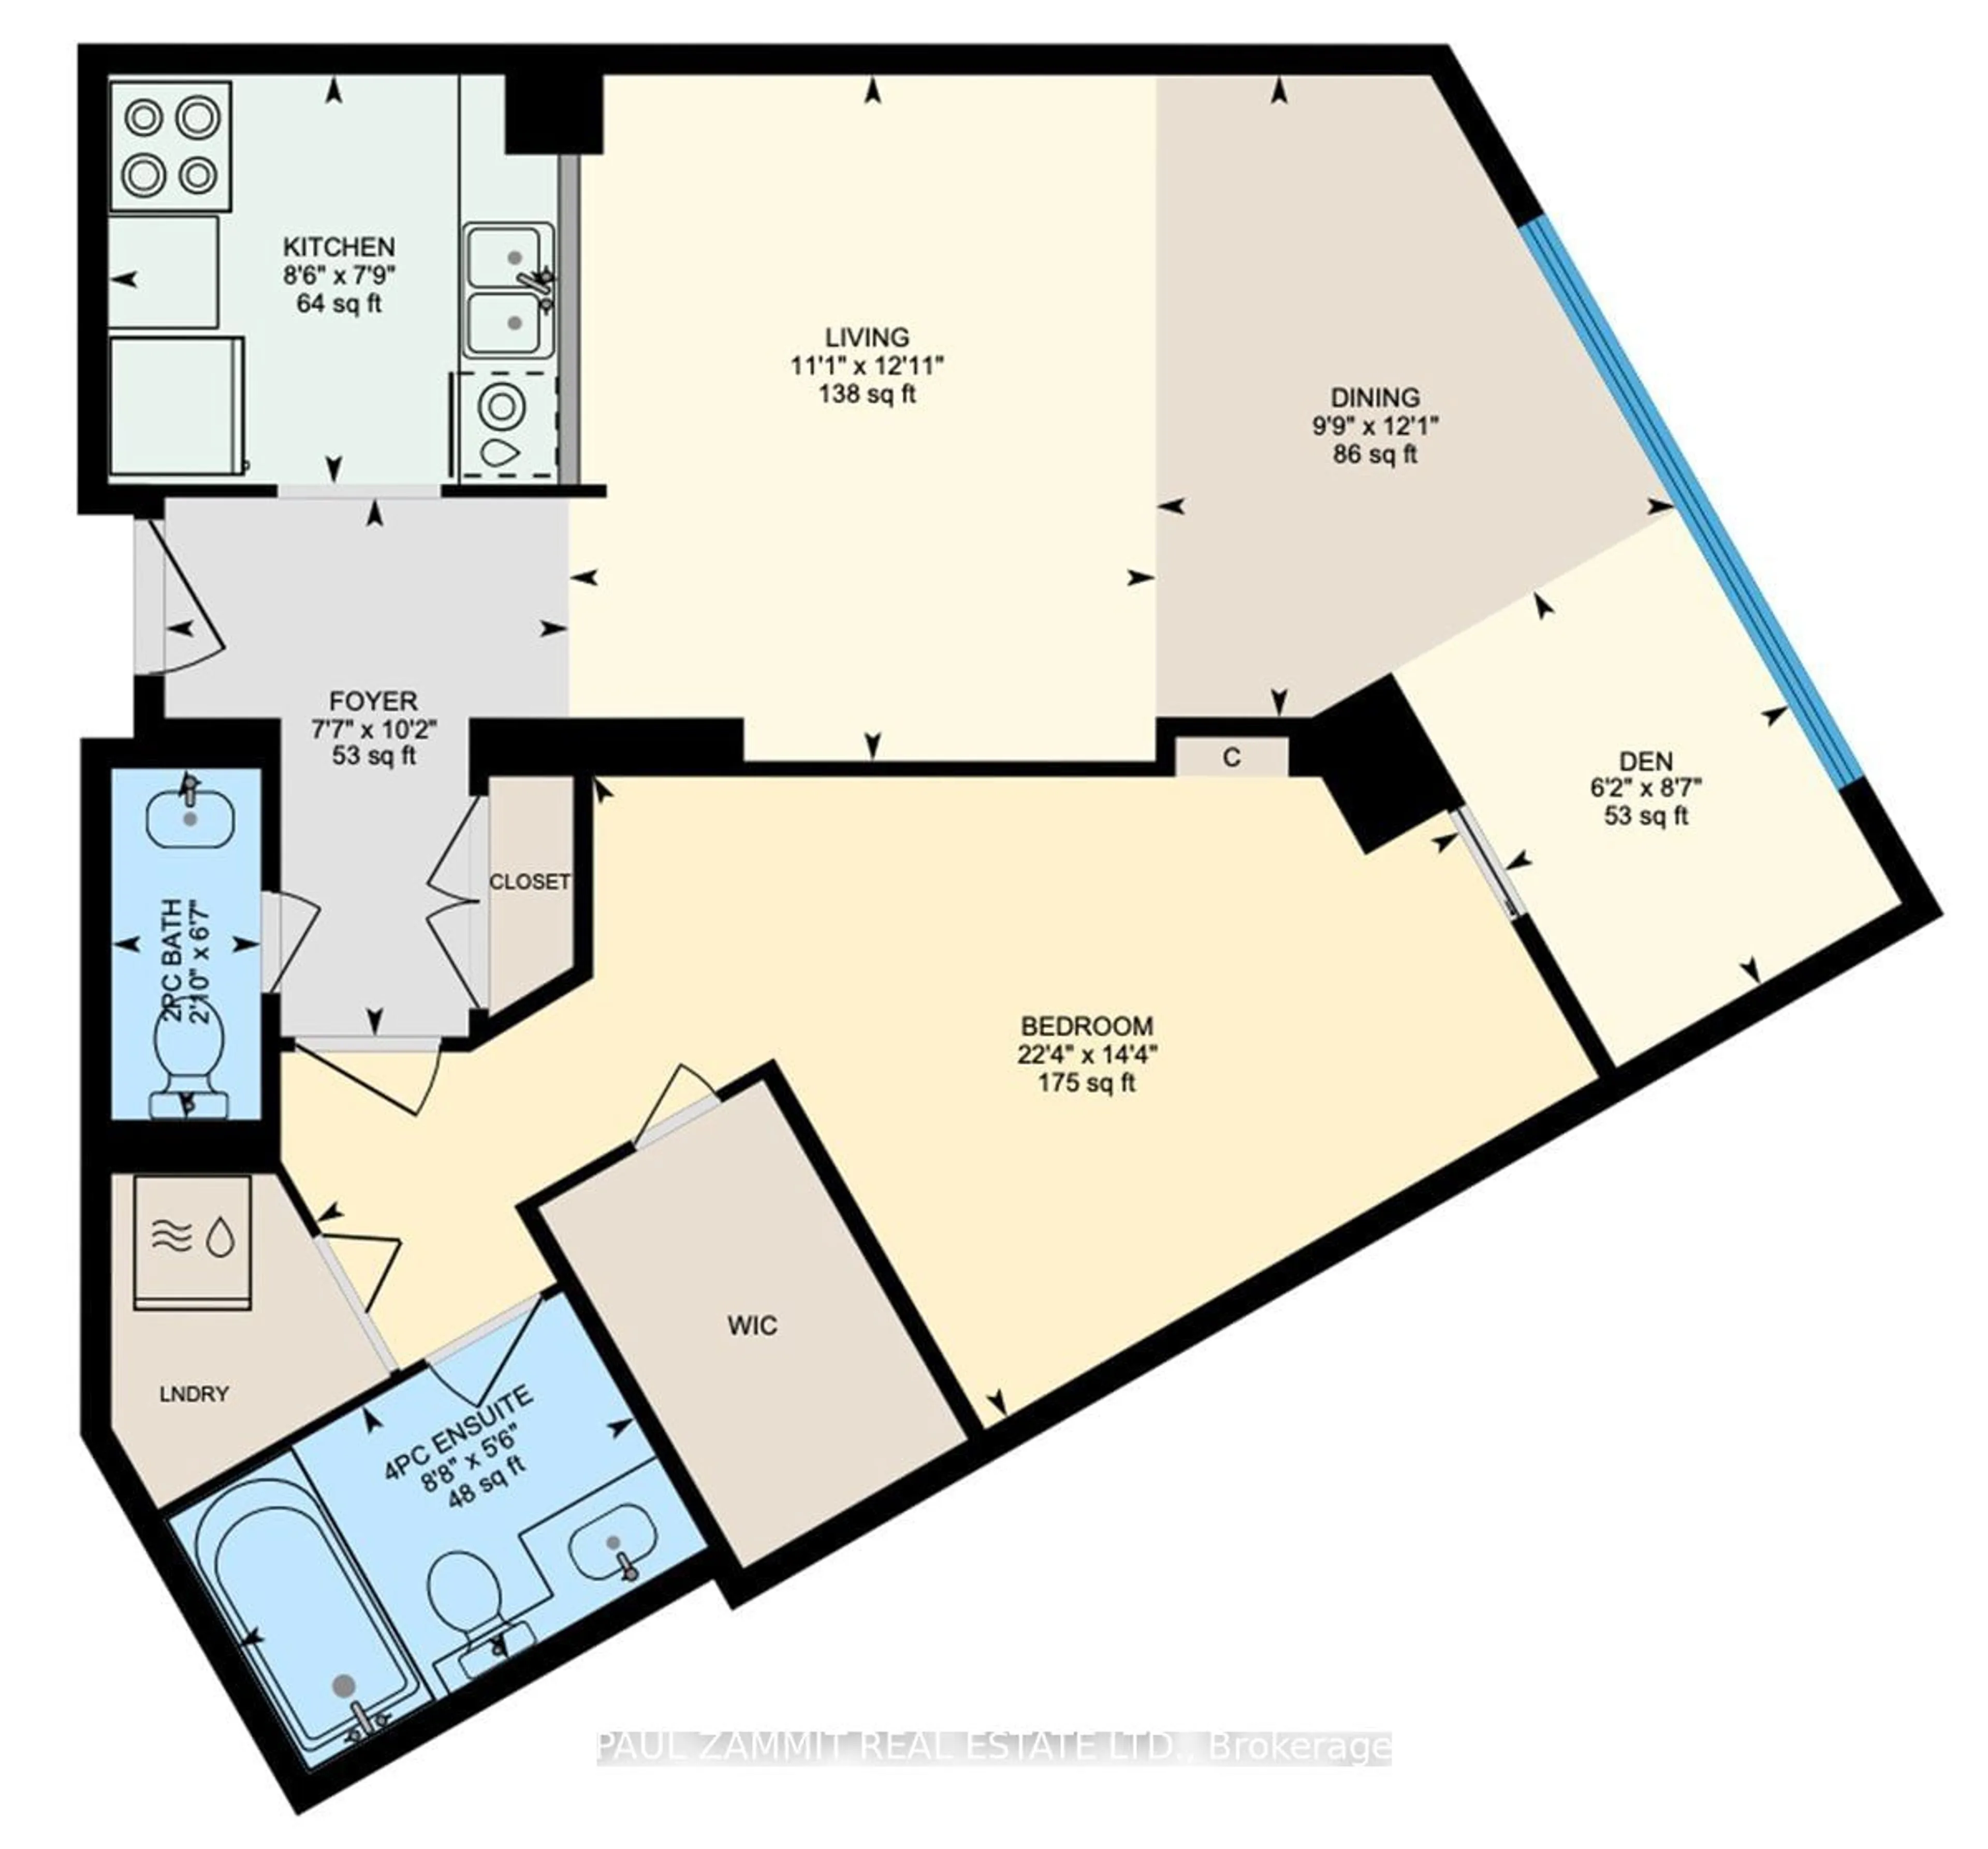 Floor plan for 7805 Bayview Ave #526, Markham Ontario L3T 7N1